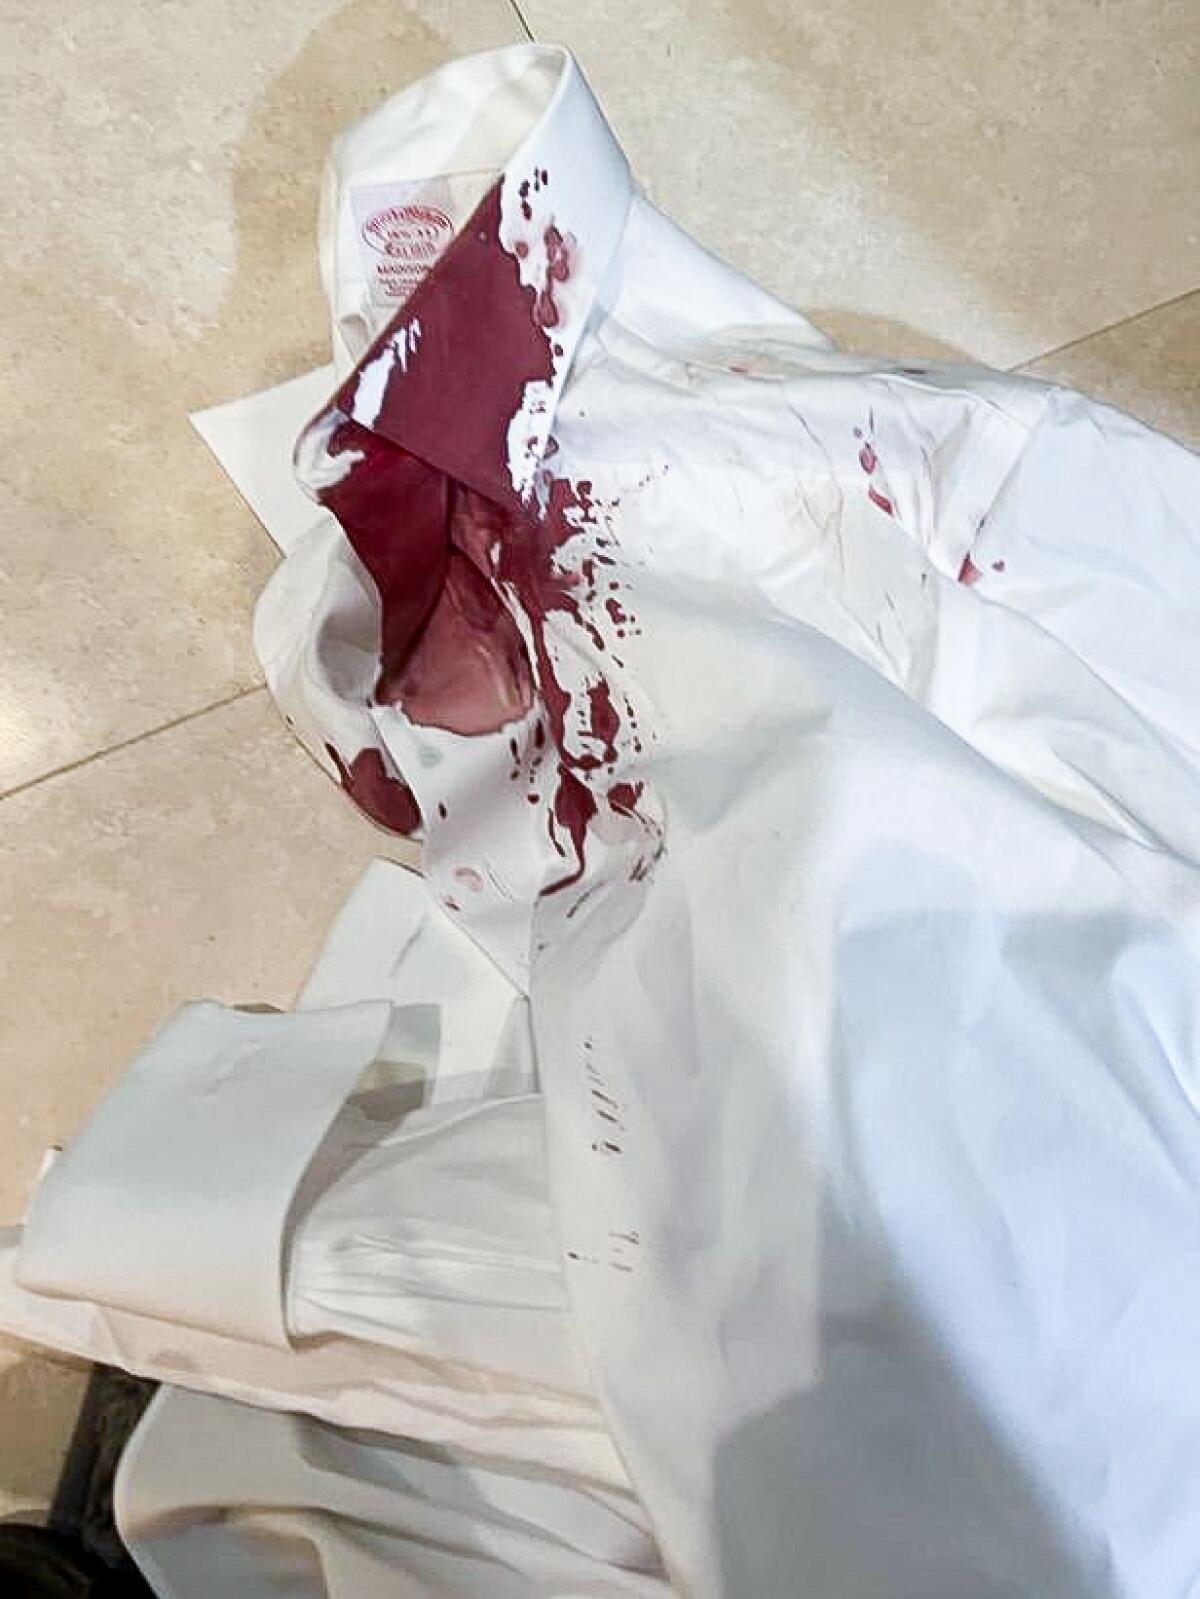 The bloodied shirt that Raphael Nissel was wearing when he was attacked on a Beverly Hills street.